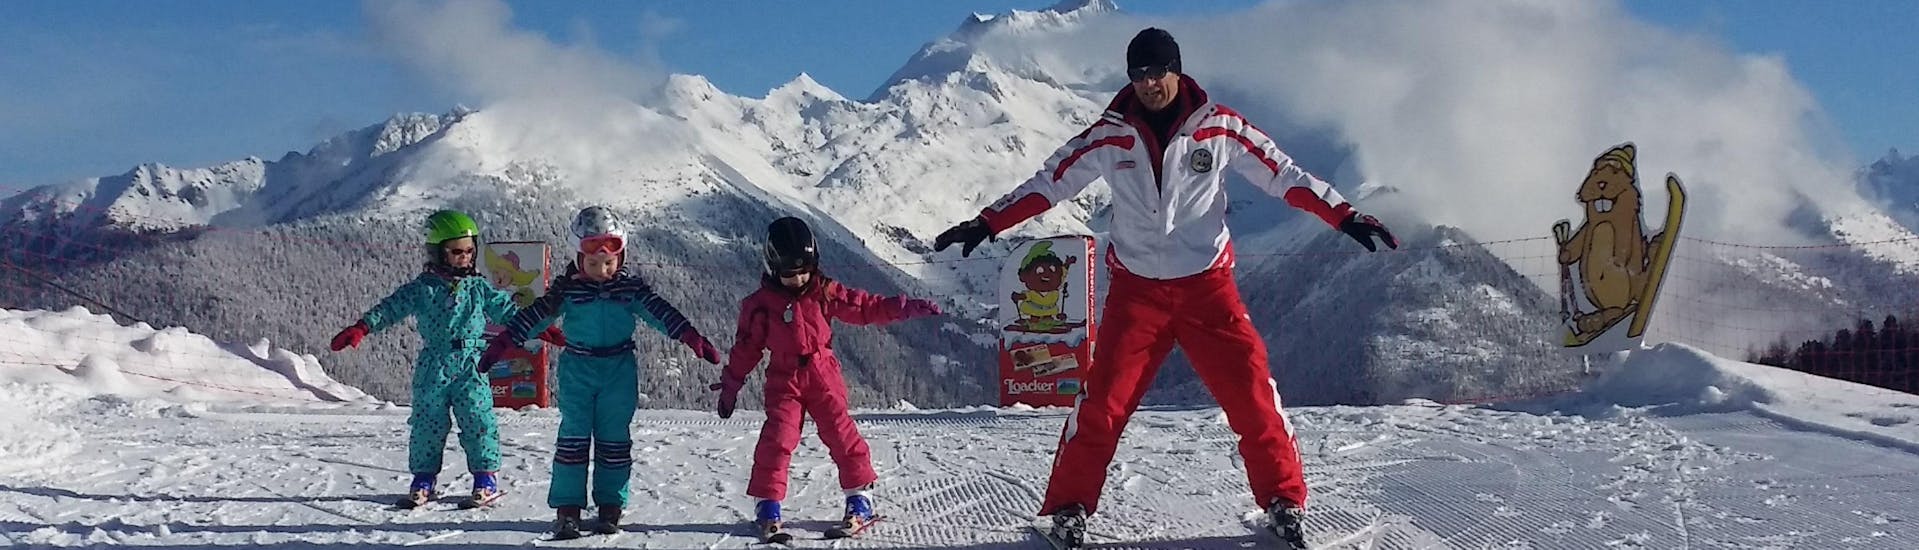 Ski instructors with kids in Speikboden Campo Tures - Sand in Taufers during a Kids Ski Lessons for Alle Levels.